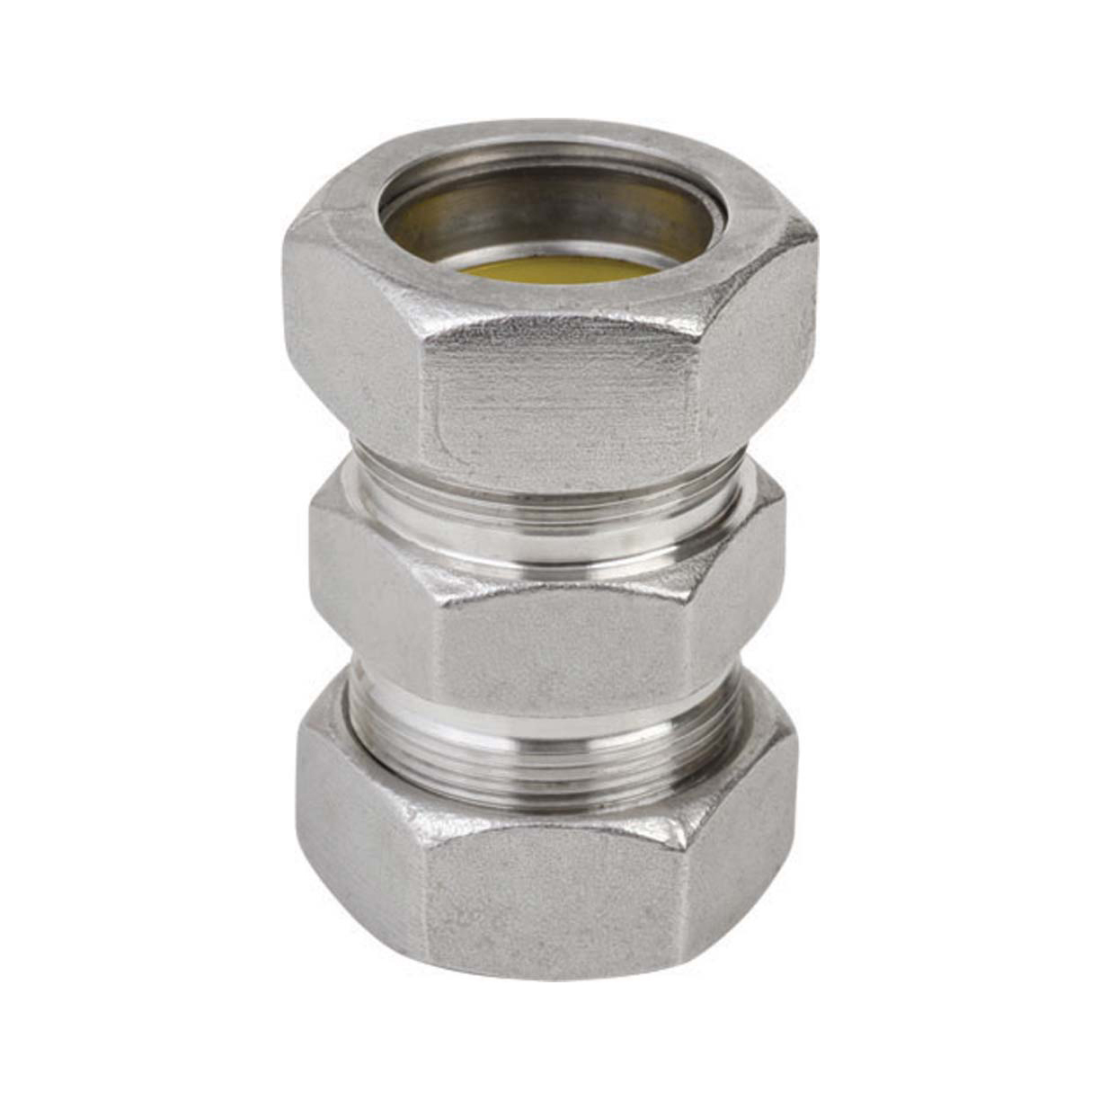 Stainless Steel Rigid/IMC Compression Couplings